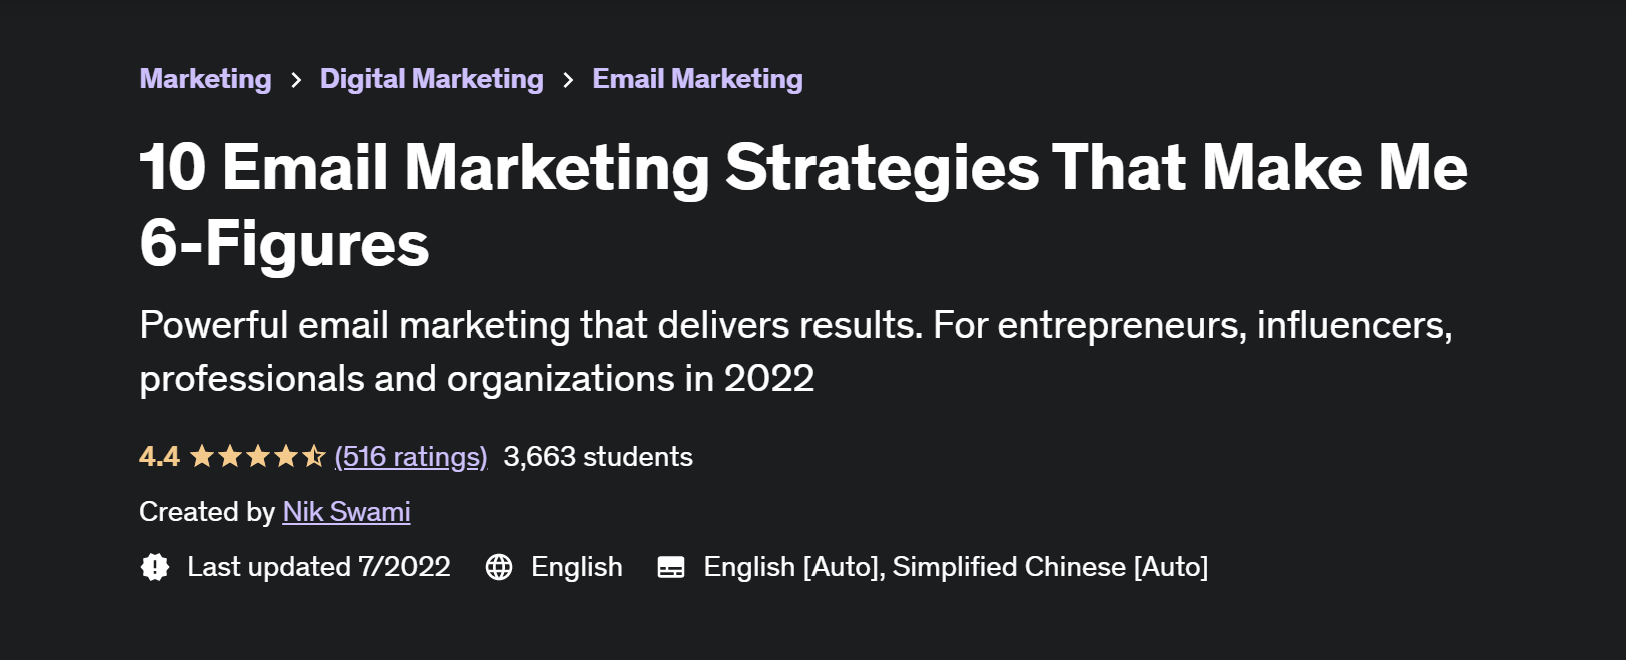 10 email marketing strategies that make me 6-figures